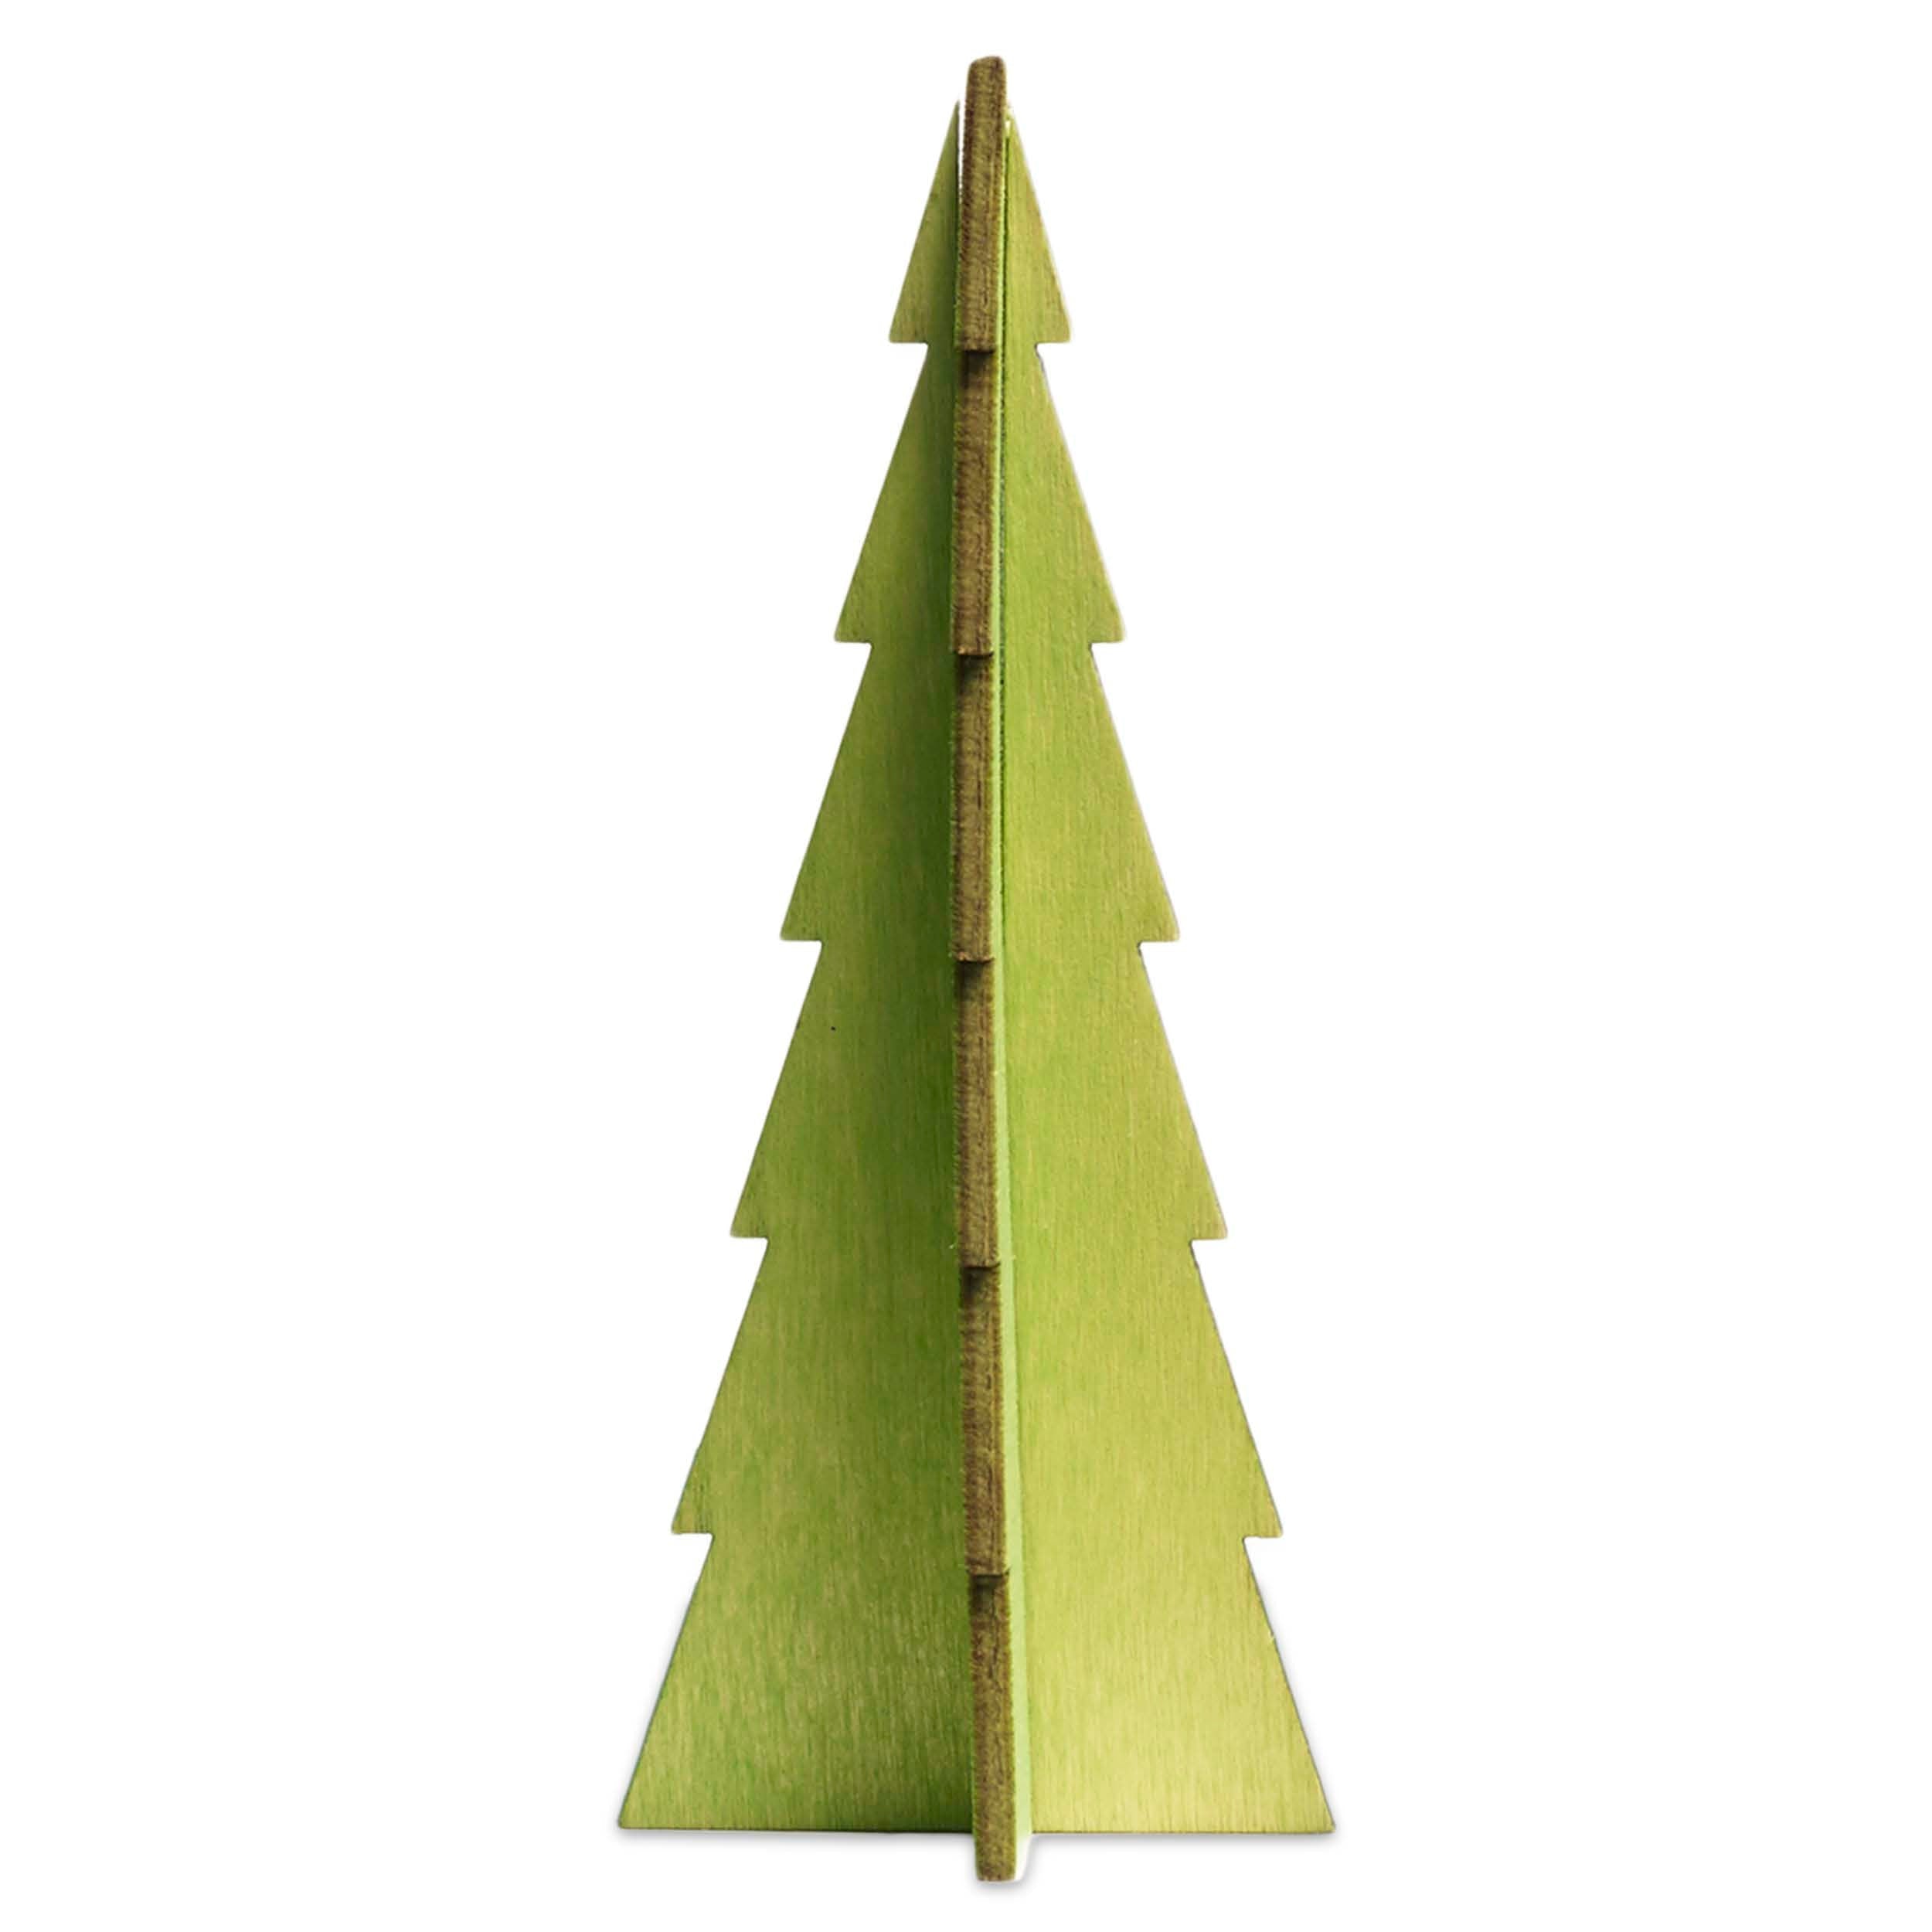 Tannenbaum Wood Trees (17 Inch) - Green Color | Image 3 | From the Tannenbaum Collection | Elegantly crafted with natural plywood for long lasting use | Available in white color | texxture home